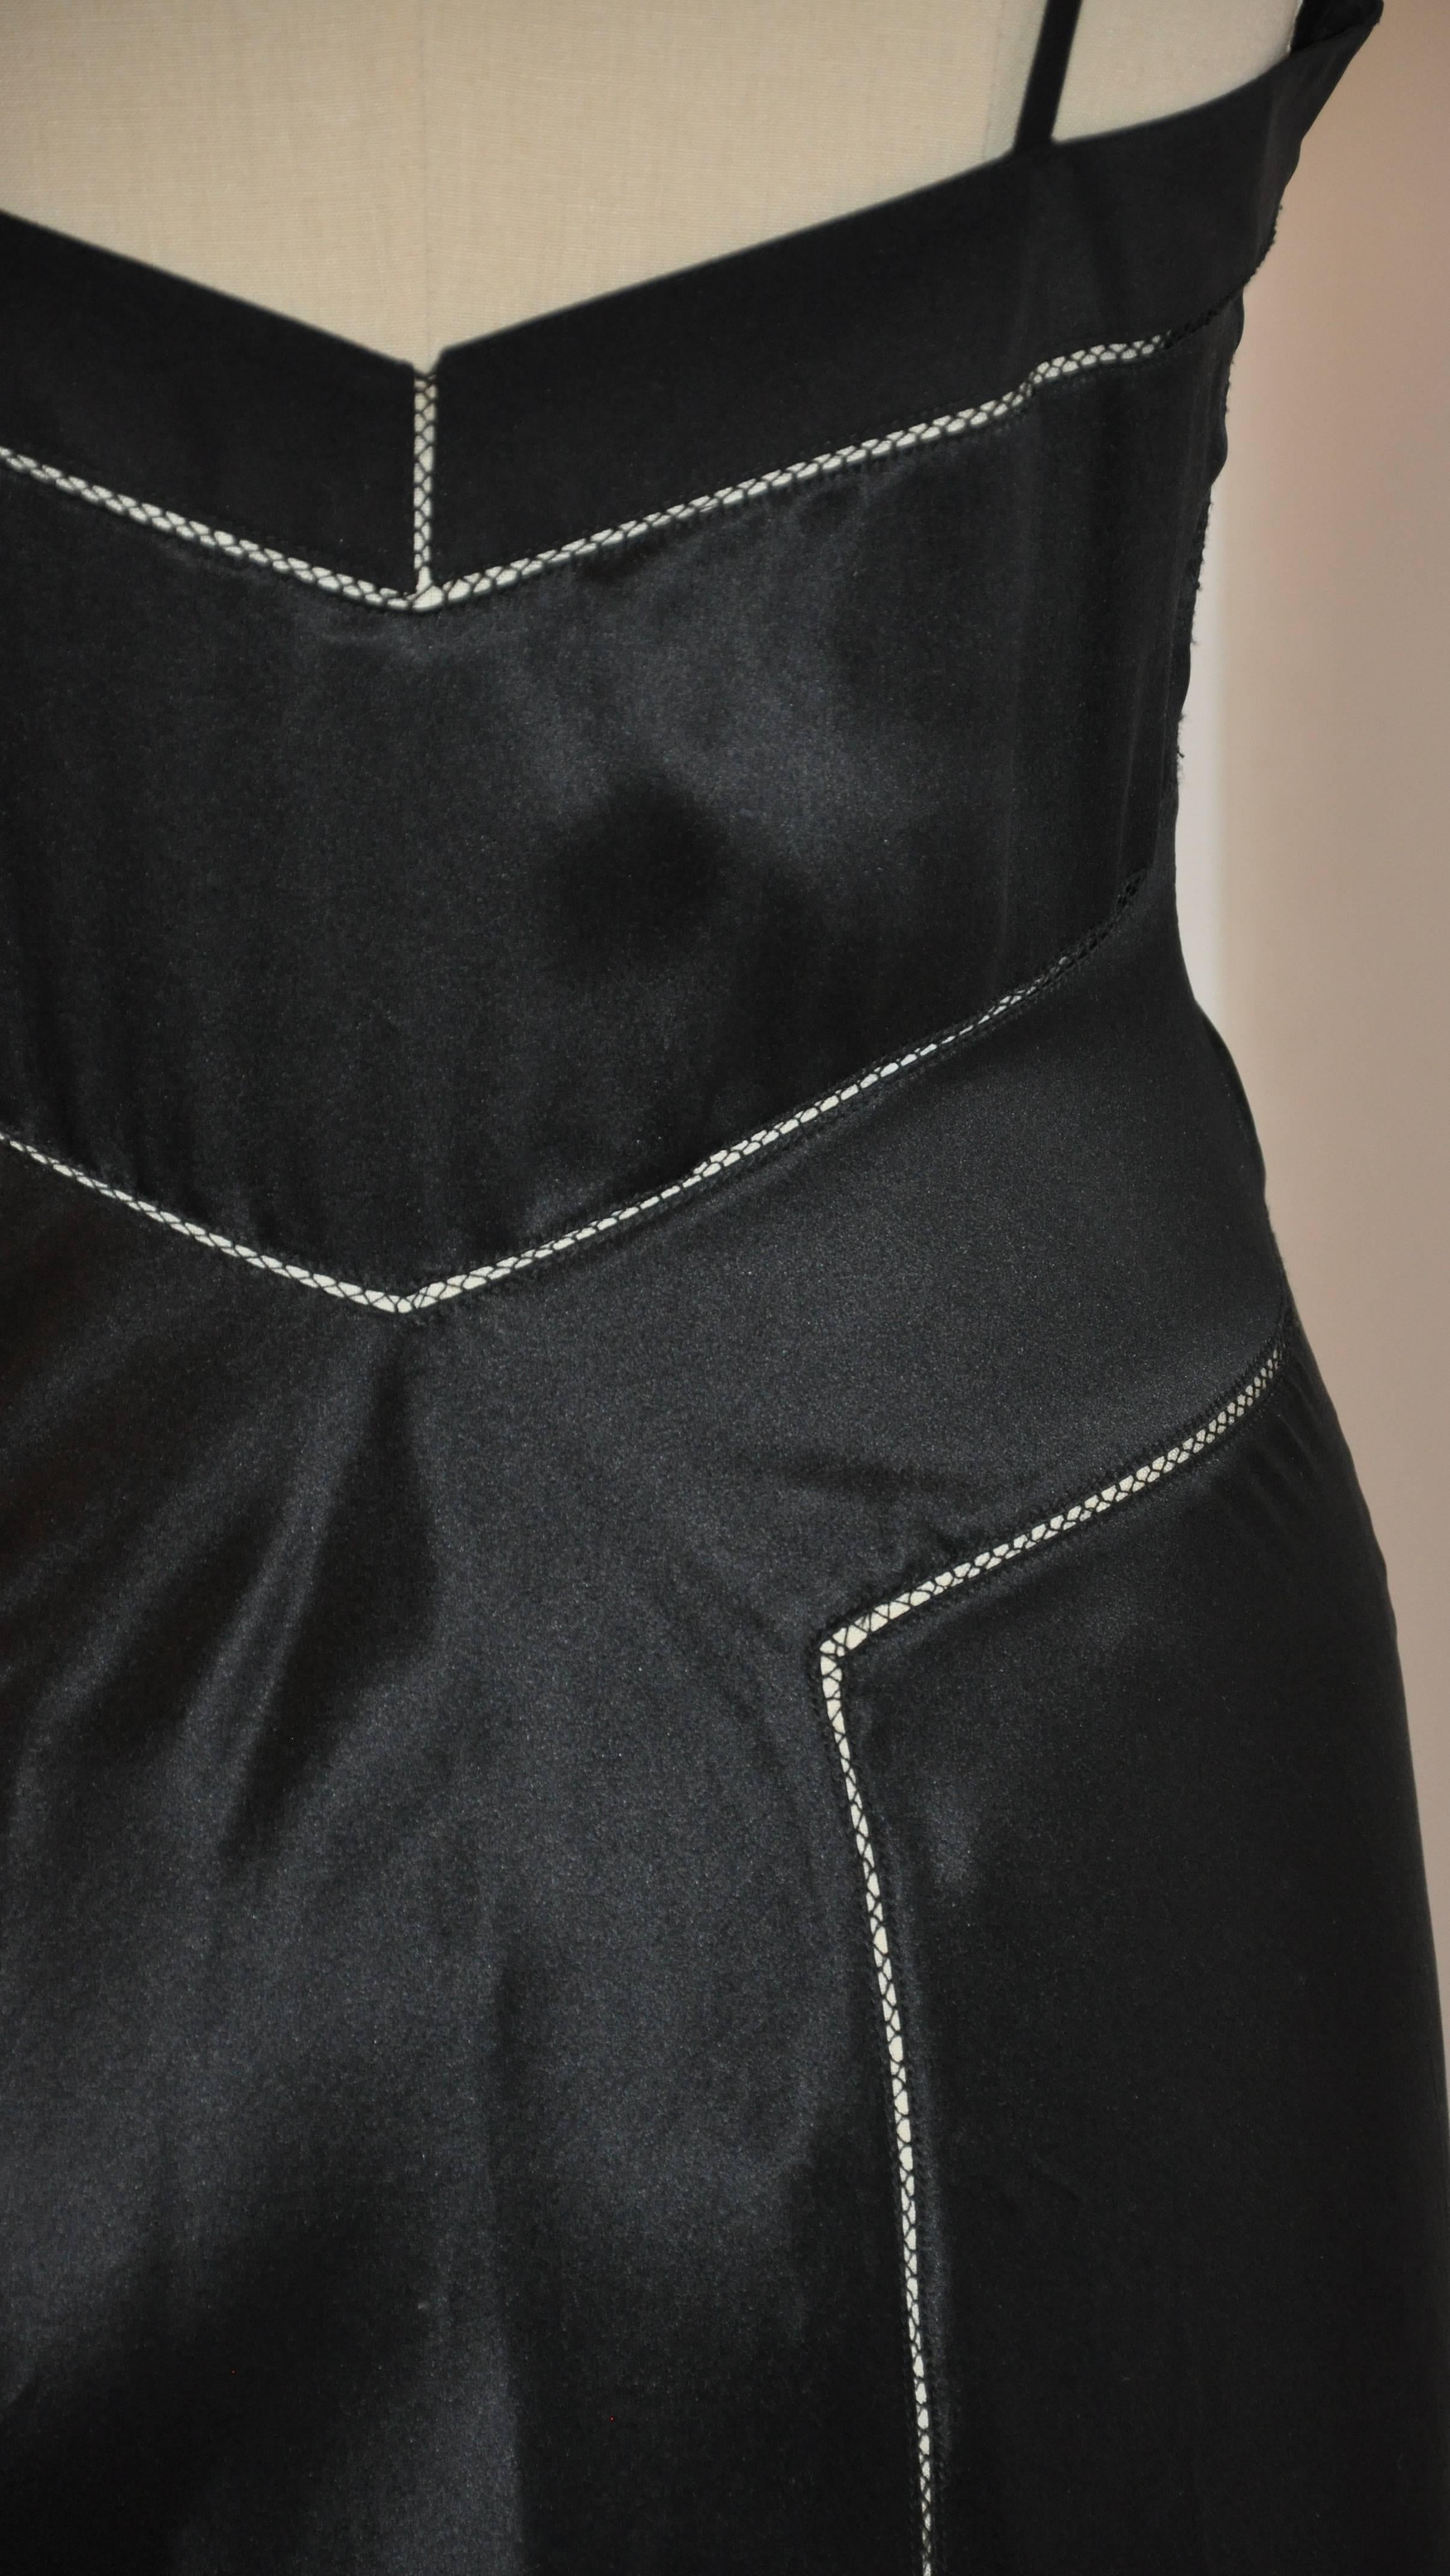 Marc Jacobs A-Line Black Silk Slip Dress Accented with Eyelet Detailing In Good Condition For Sale In New York, NY